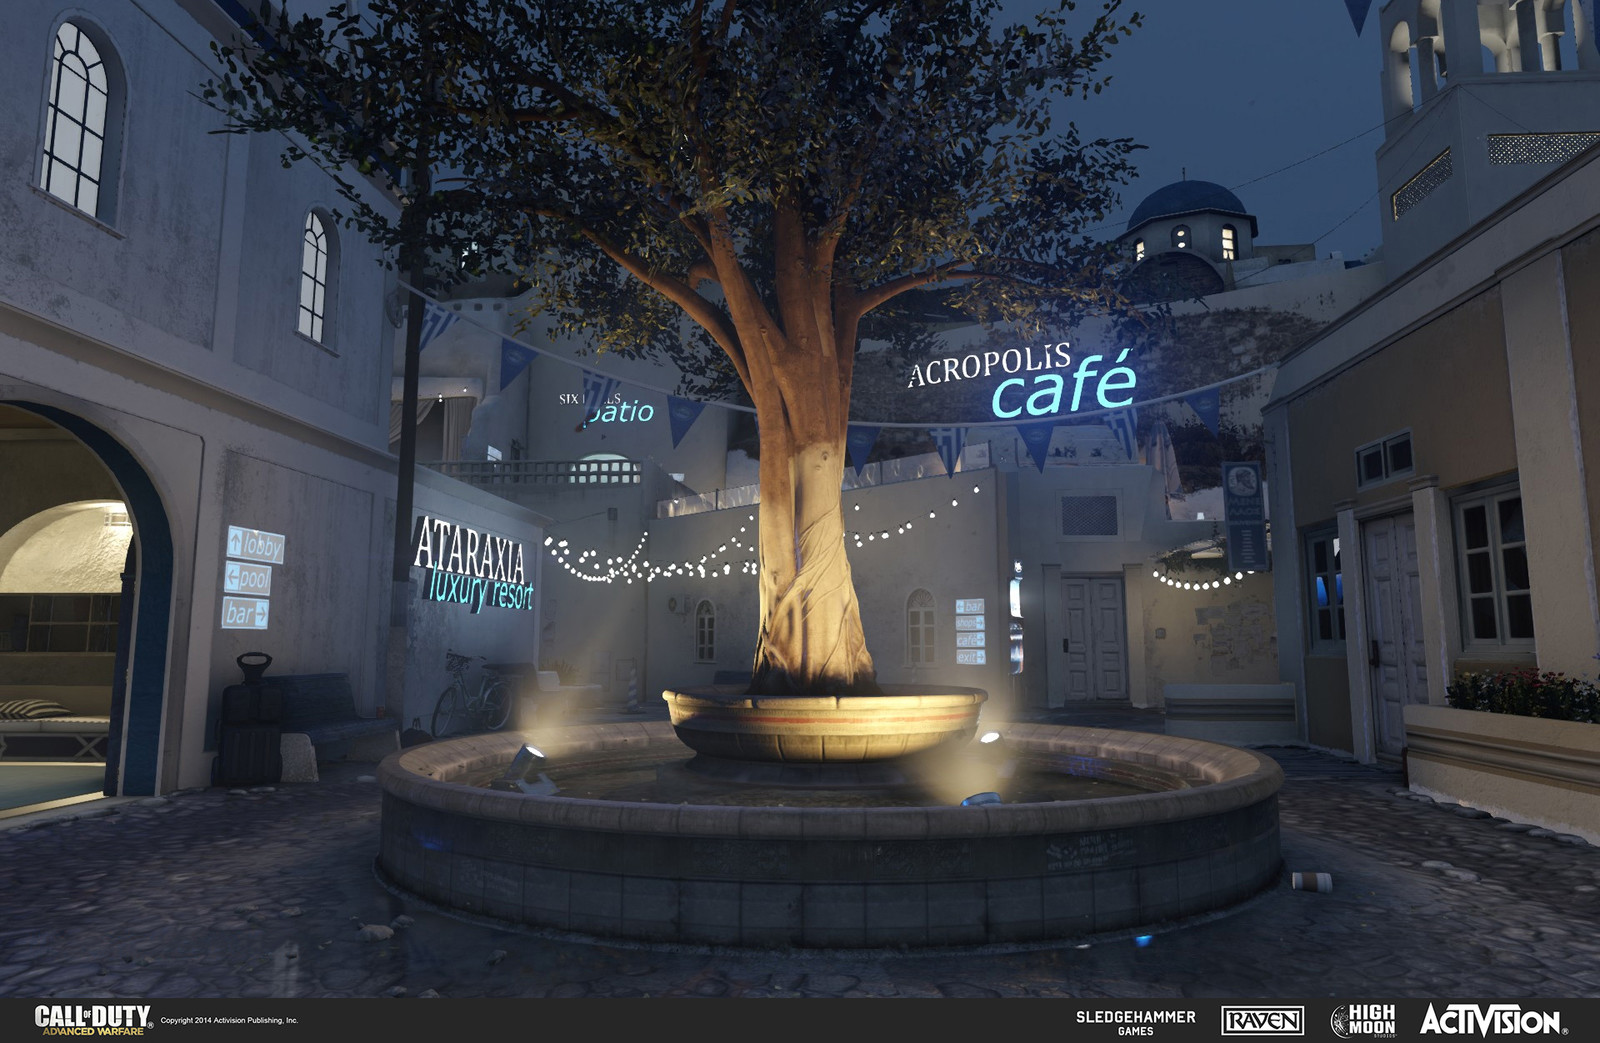 Geo work for fountain and light canisters in the multiplayer map Terrace. The fountain was created in the game engine and the light canisters in 3DSMax. Also in the background are hanging wires (for the lights) and lit signs, both created in 3DSMax.